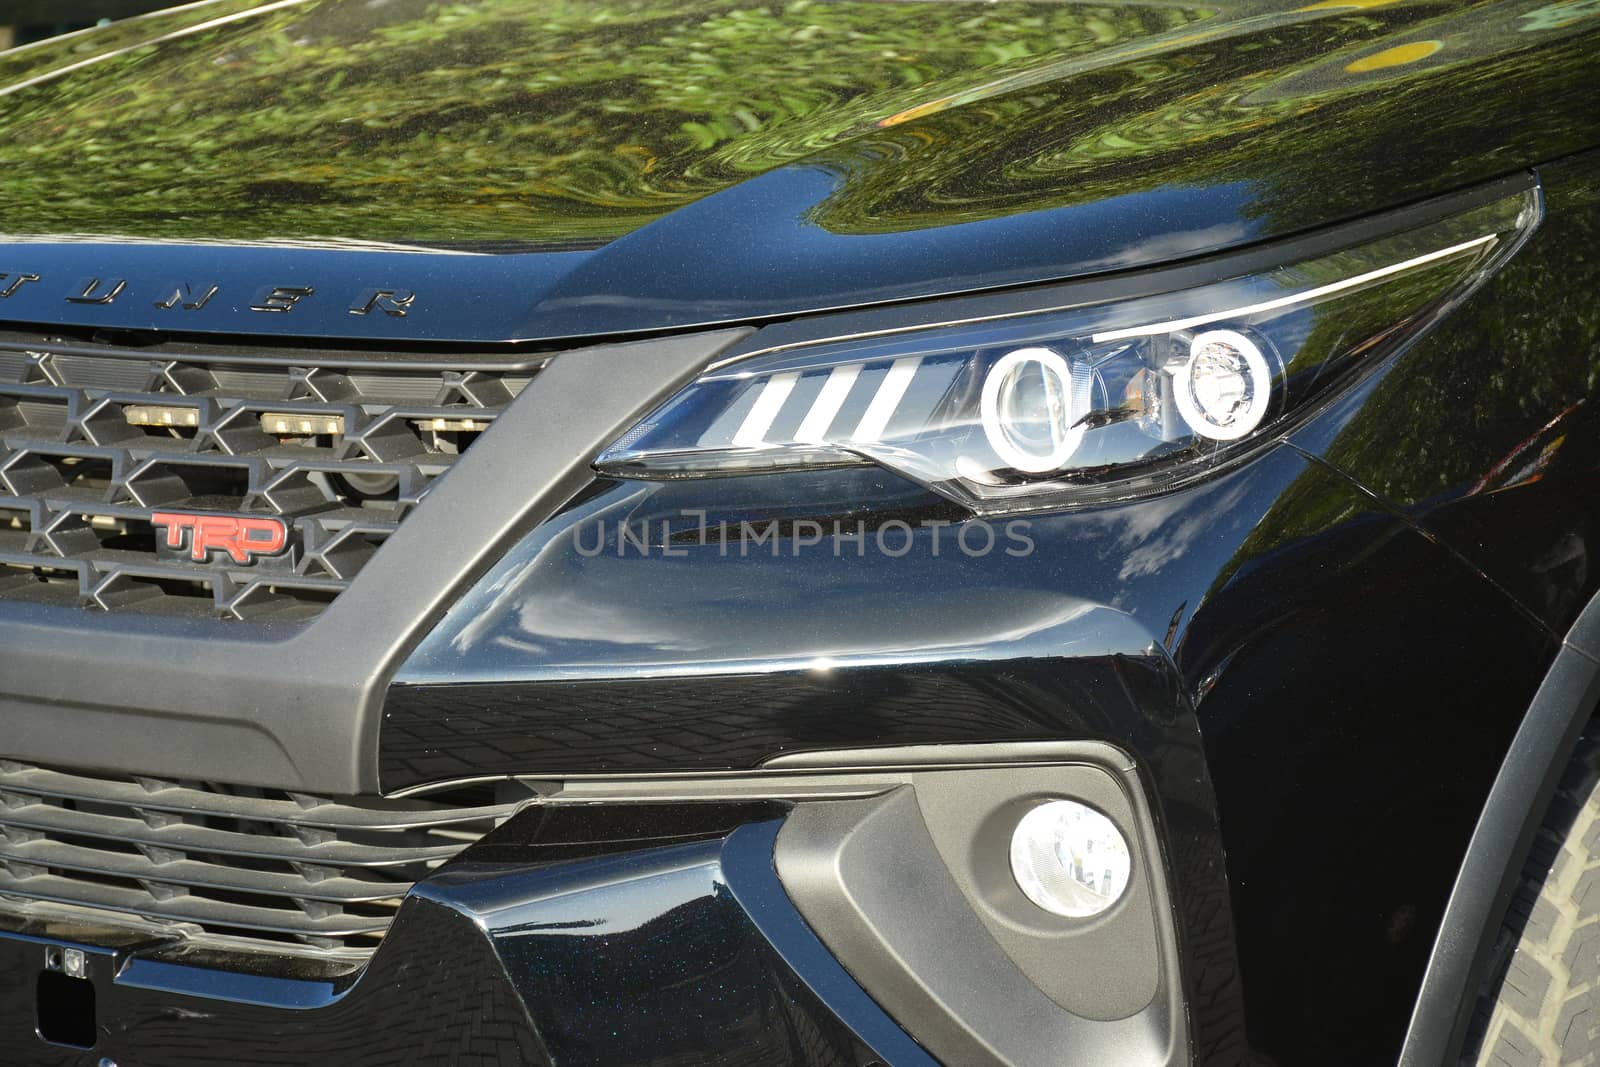 PASAY, PH - DEC 8 - Toyota fortuner suv headlight at Bumper to Bumper car show on December 8, 2018 in Pasay, Philippines.